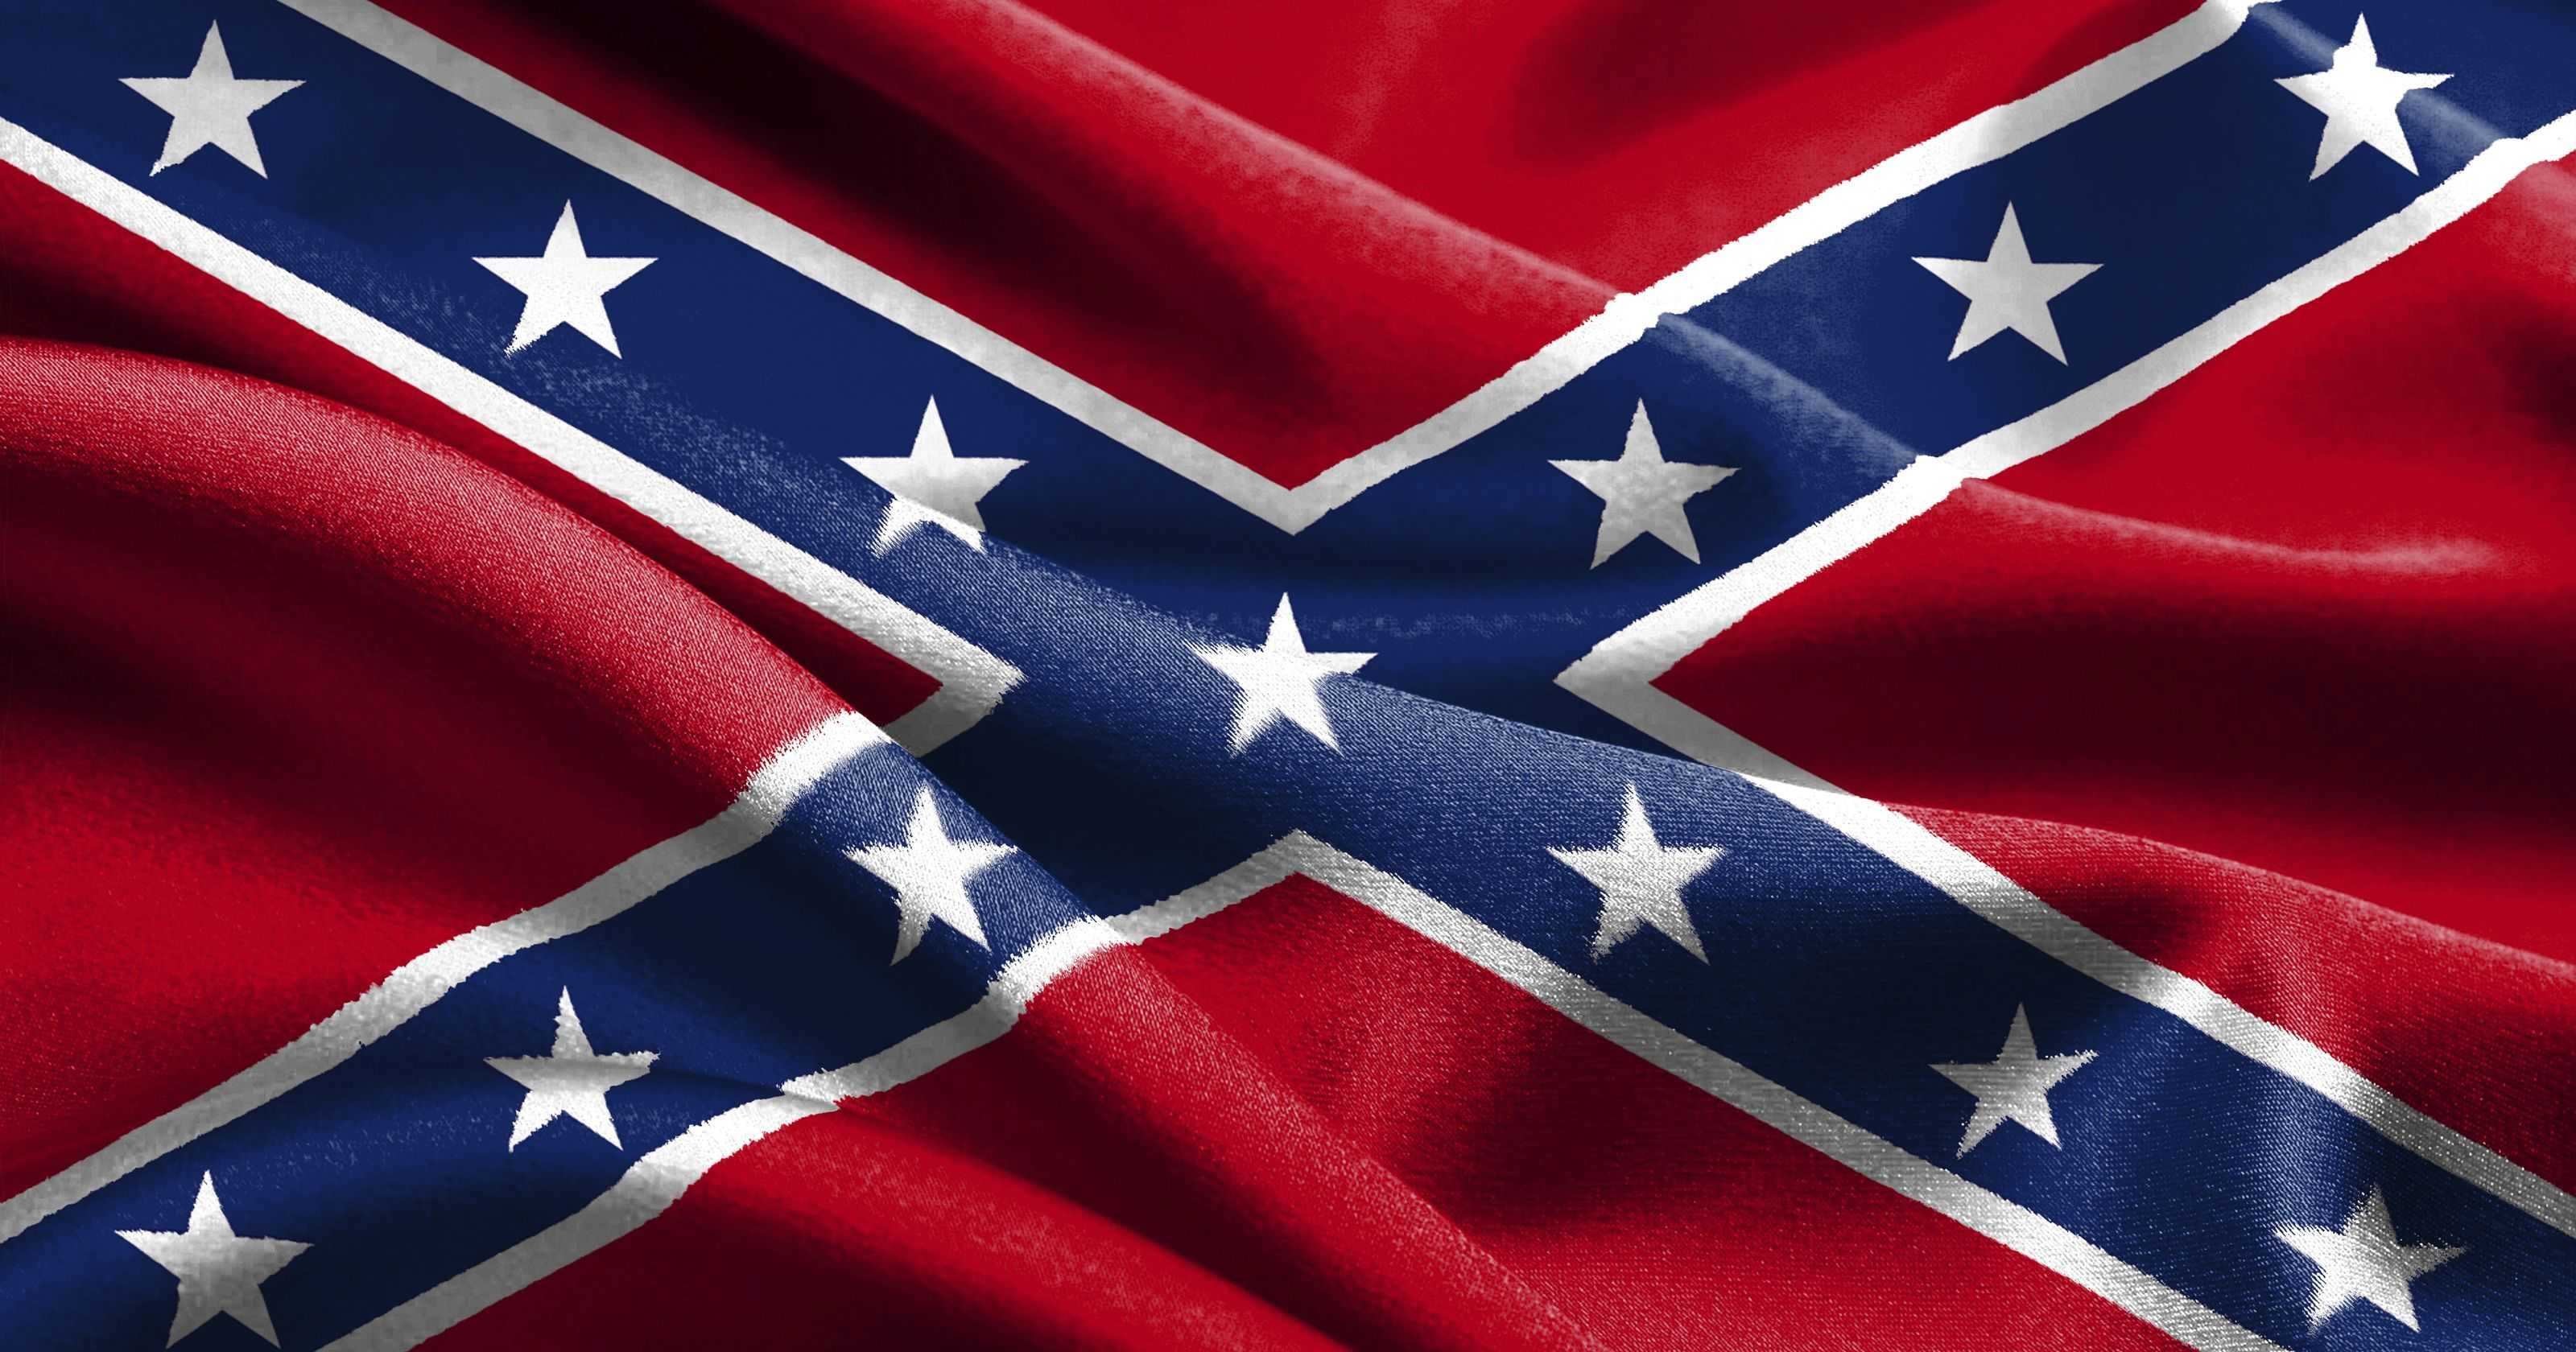 3200x1680 Confederate flag wallpaper iphone best of confederate flag full jpg   Confederate flag iphone